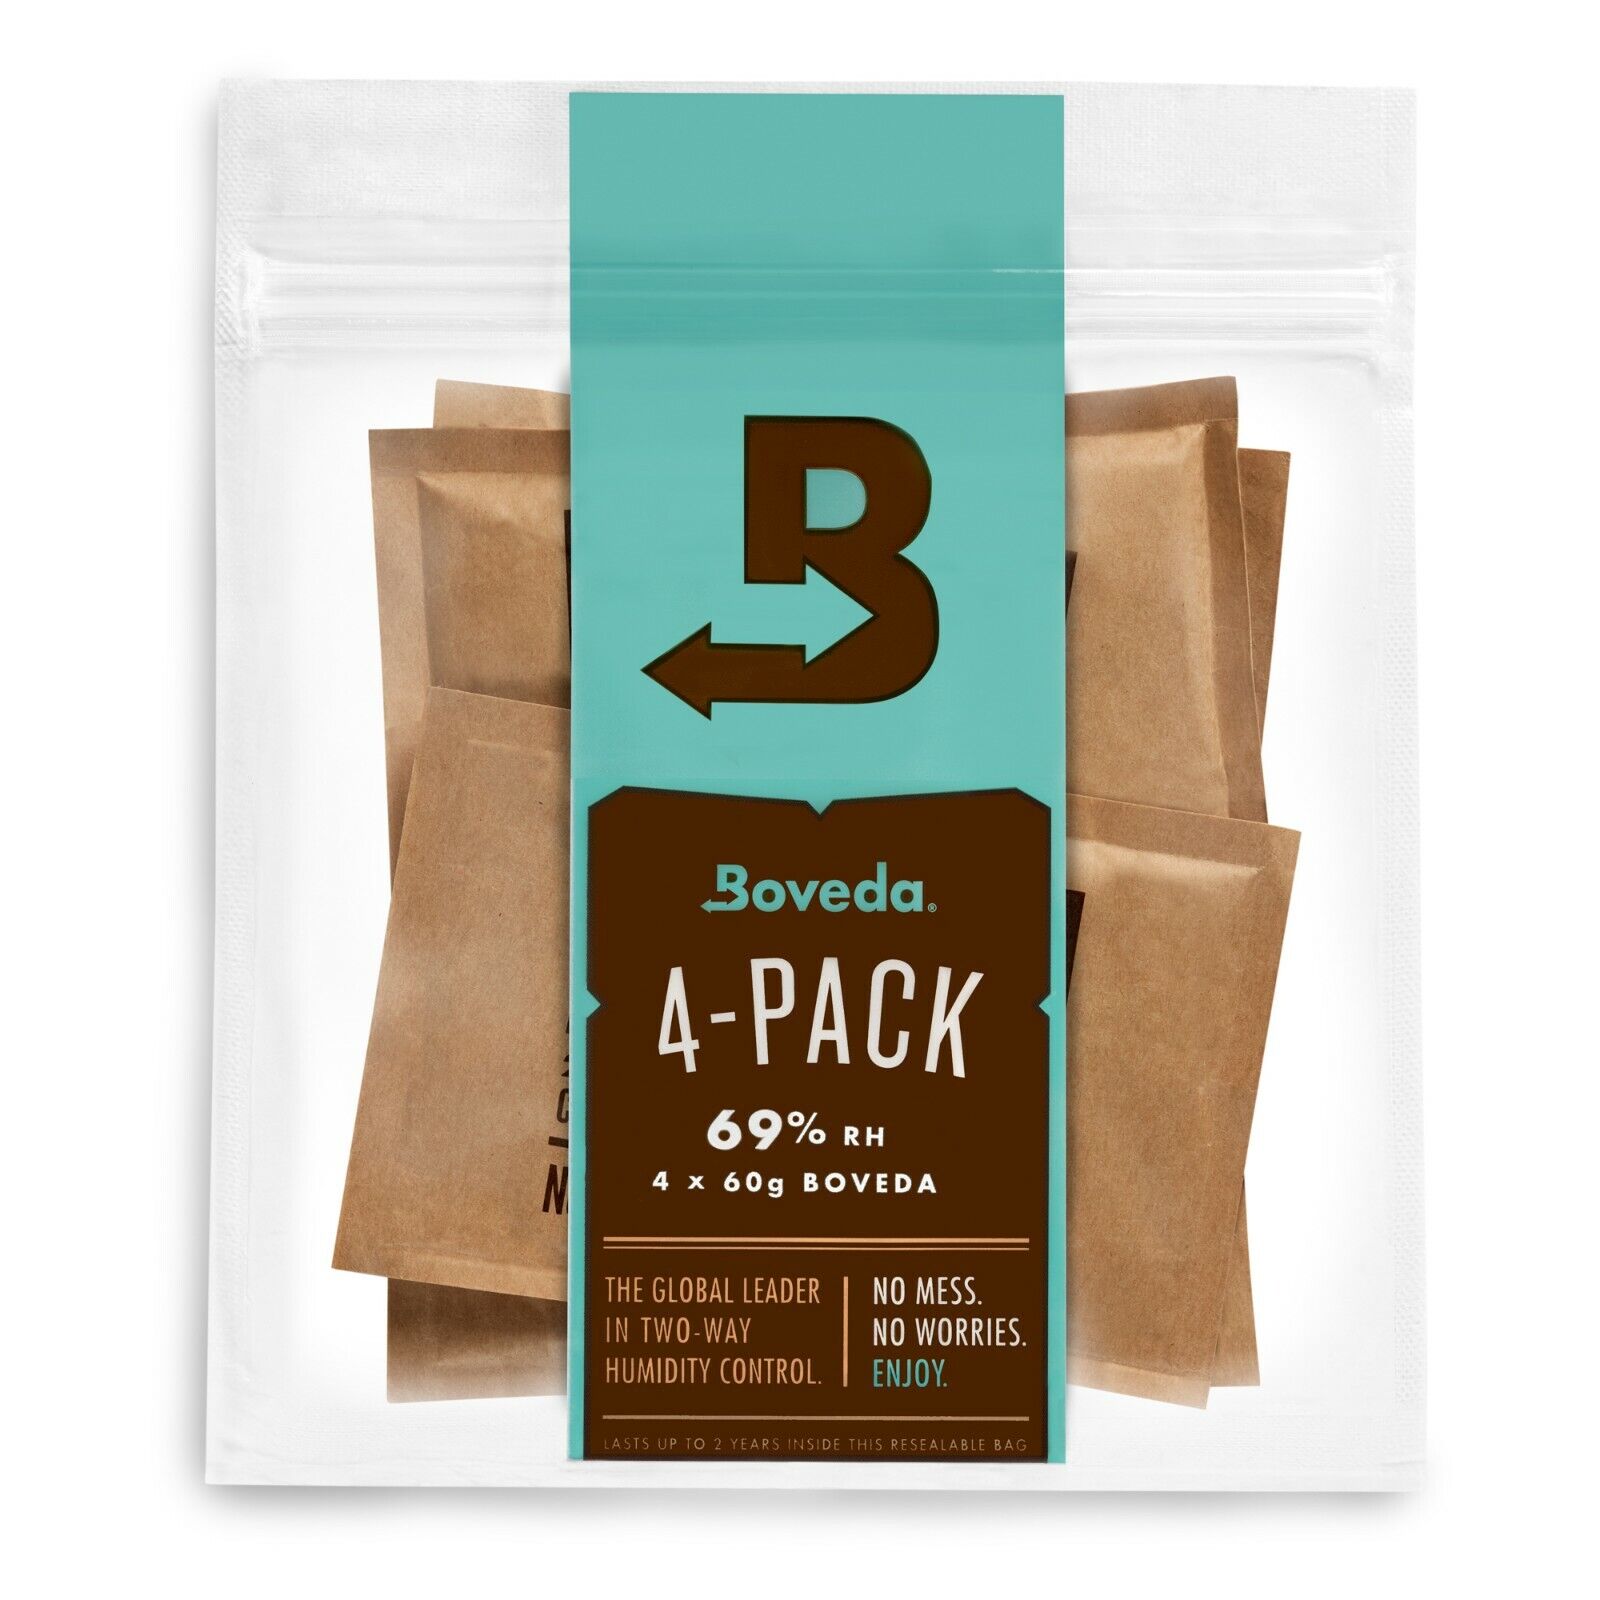 Boveda 69% RH 2-Way Humidity Control - Protects & Restores - Size 60 - 4 Count